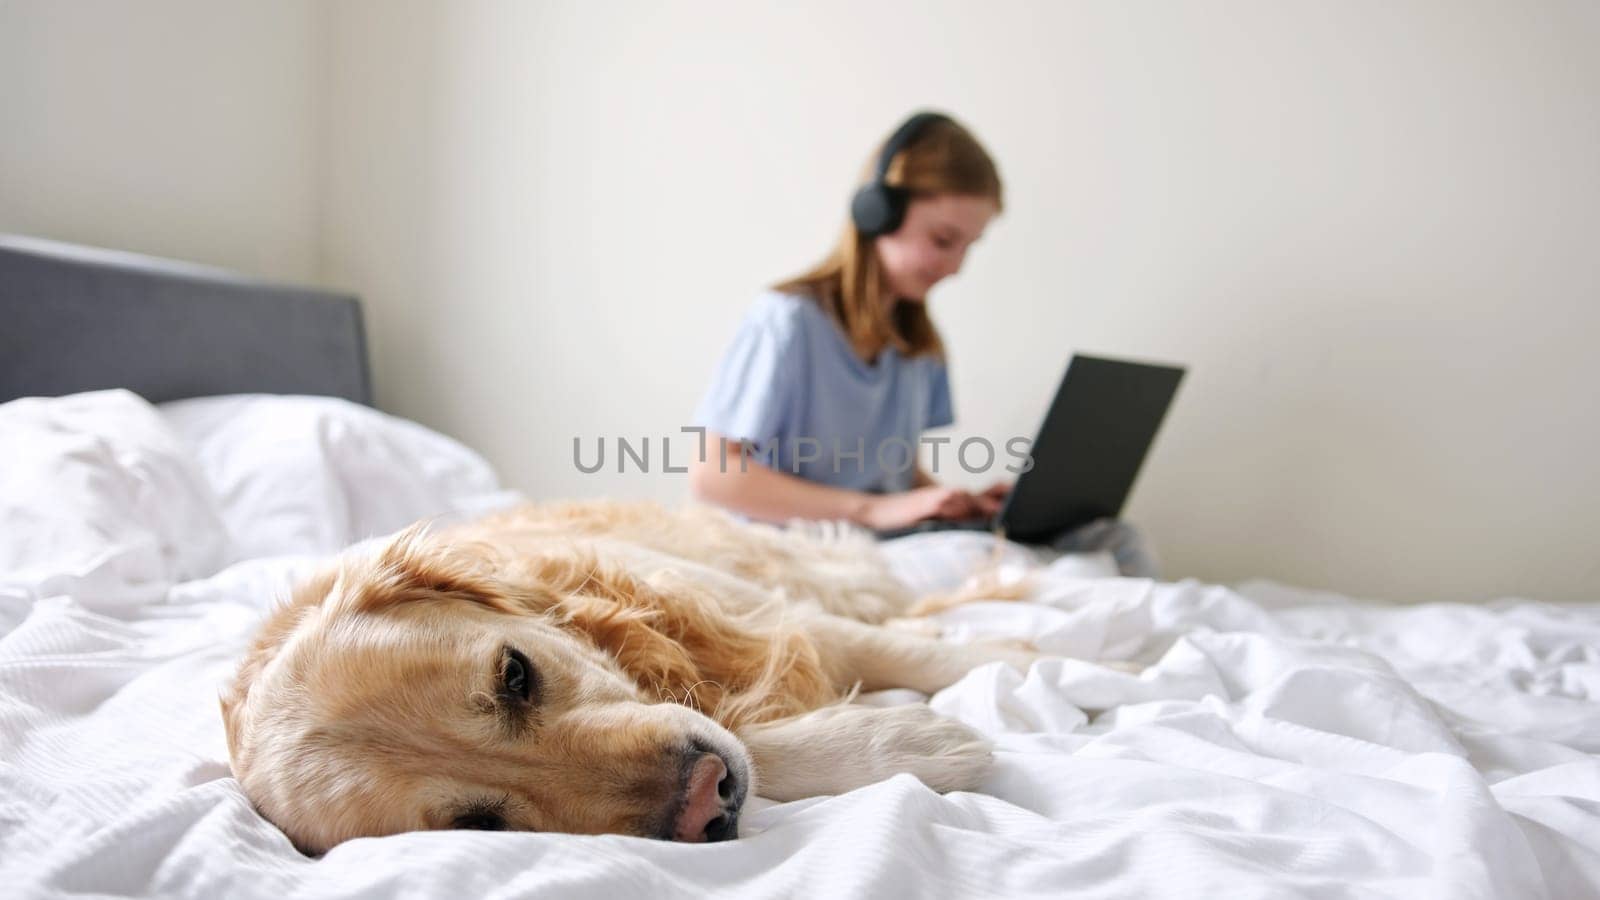 Beautiful Golden Retriever Dog Lying On The Bed, Little Girl Working On A Laptop by GekaSkr